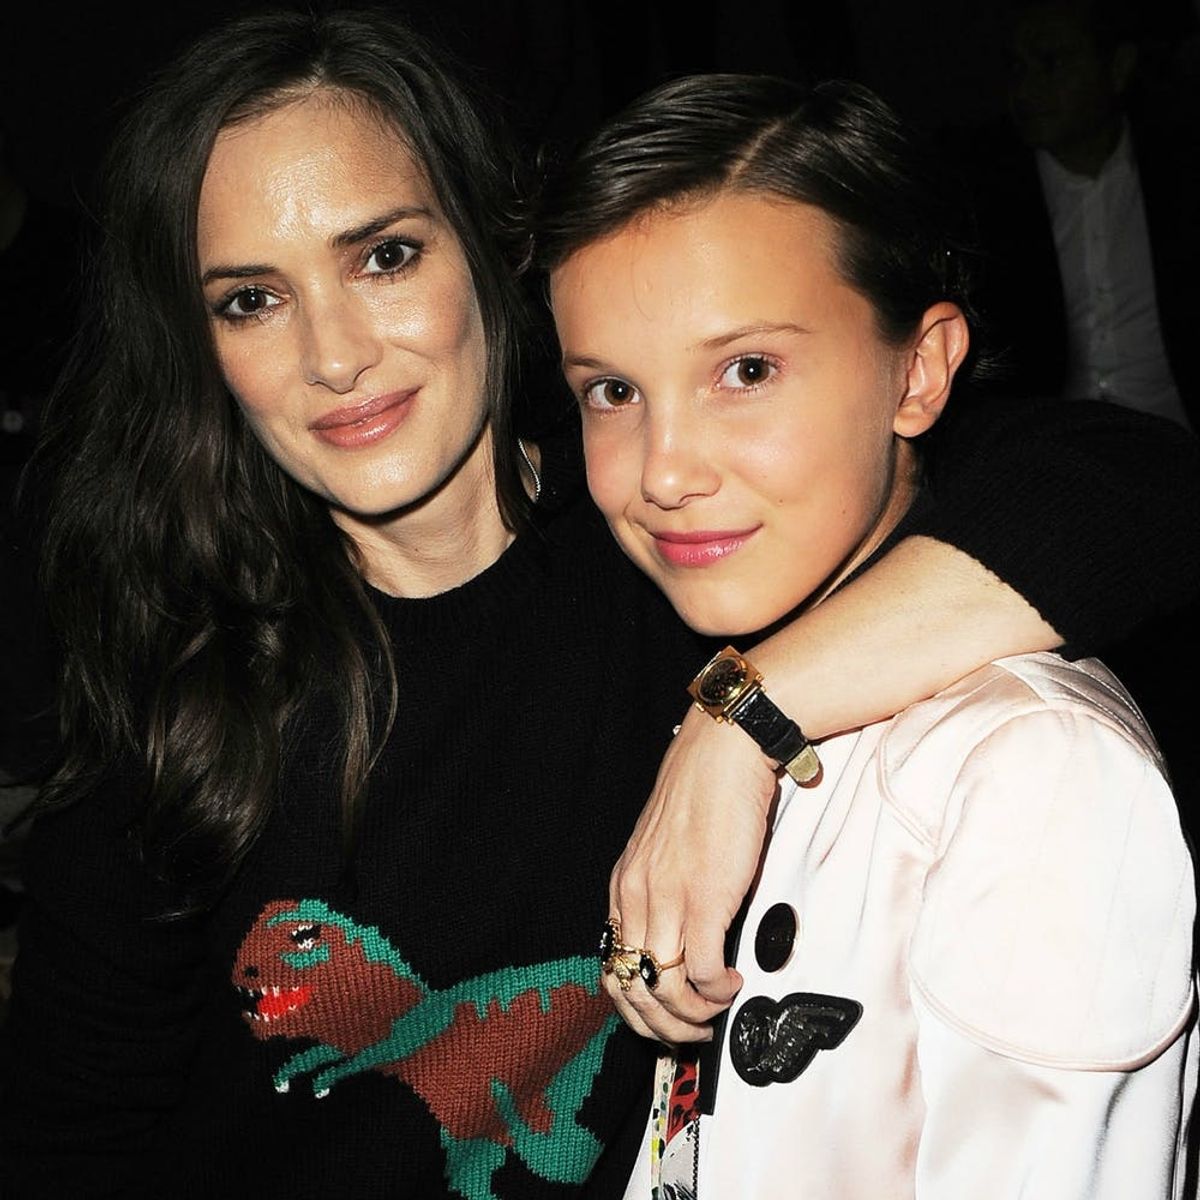 Winona Ryder and Millie Bobby Brown Shared a Mini-Reunion That Was Too Cute for Words